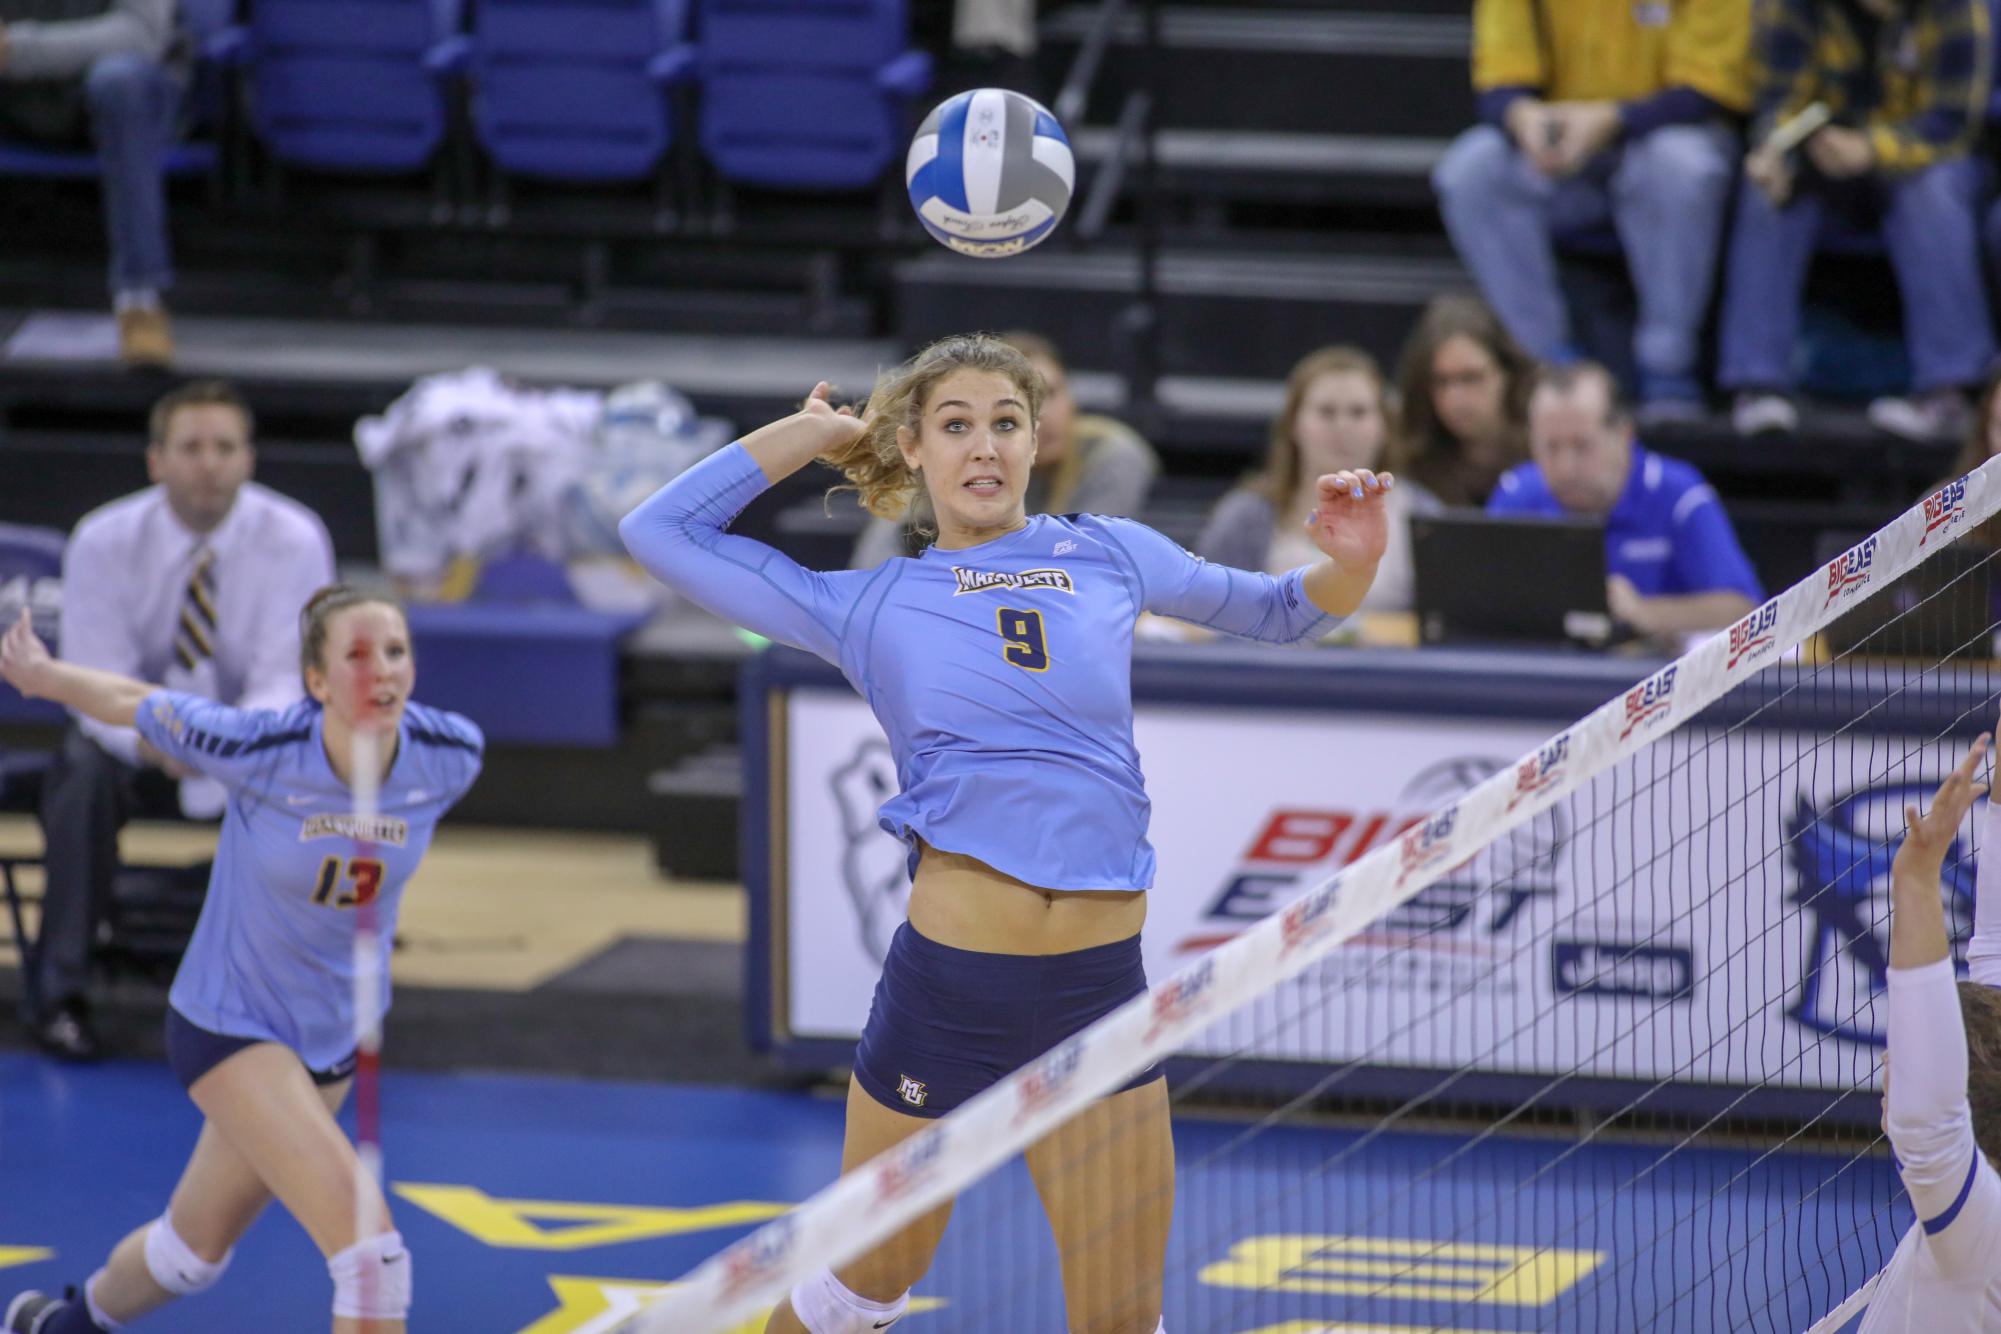 Jenna Rosenthal: Trailblazer for Women’s Volleyball in Professional Leagues